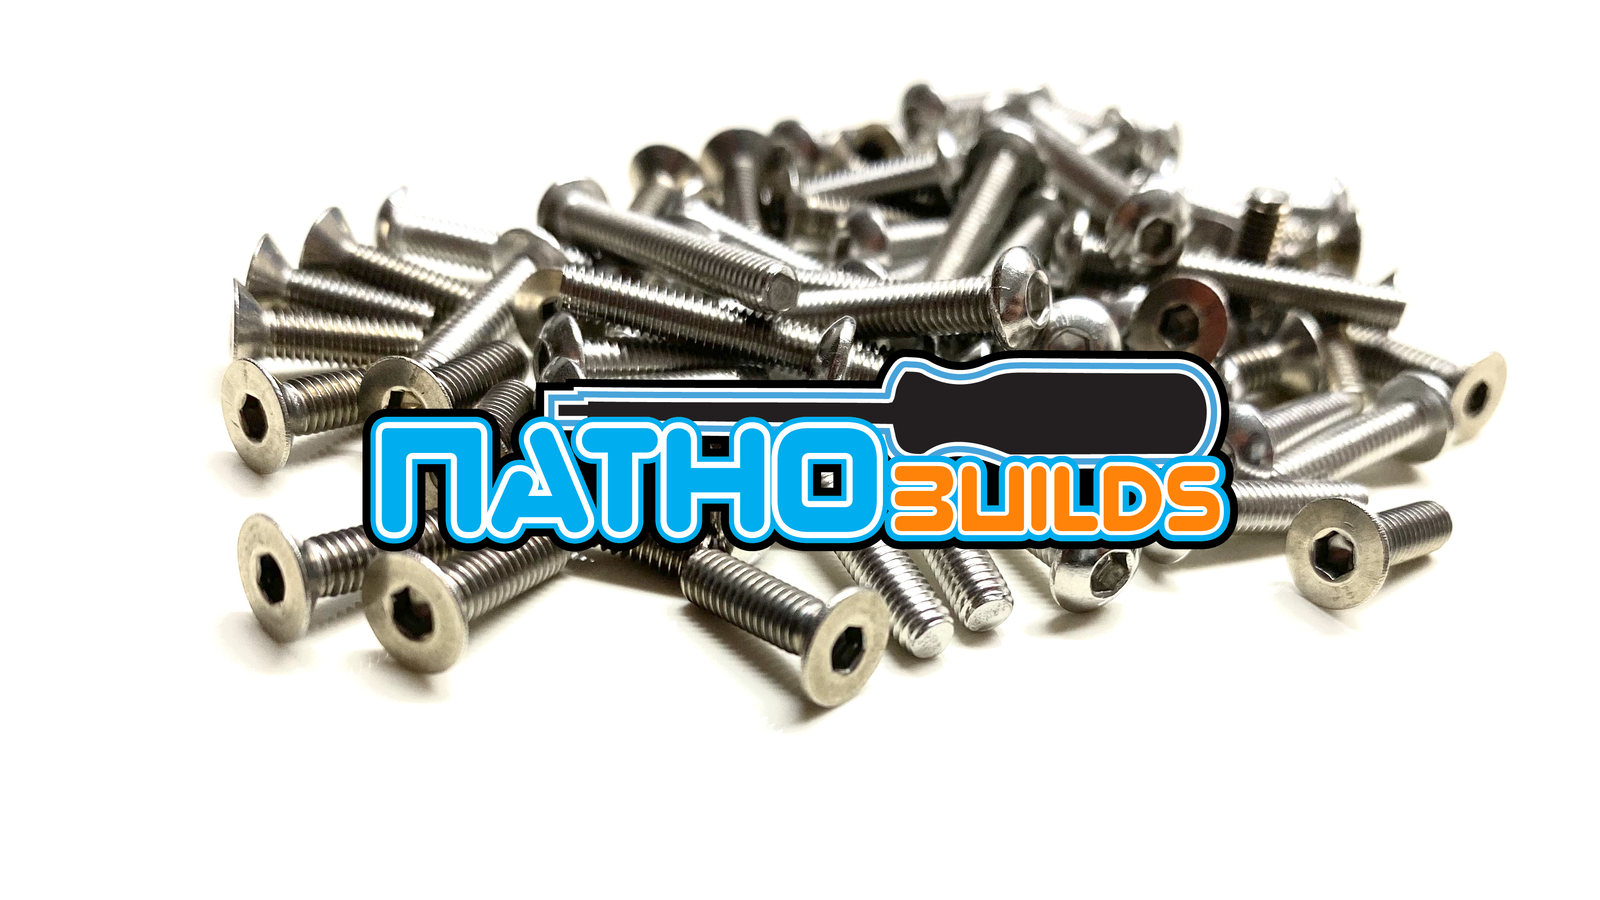 NathoBuilds: Stainless Steel Screw Kits for 1/8th - Team Associated RC8B3.1